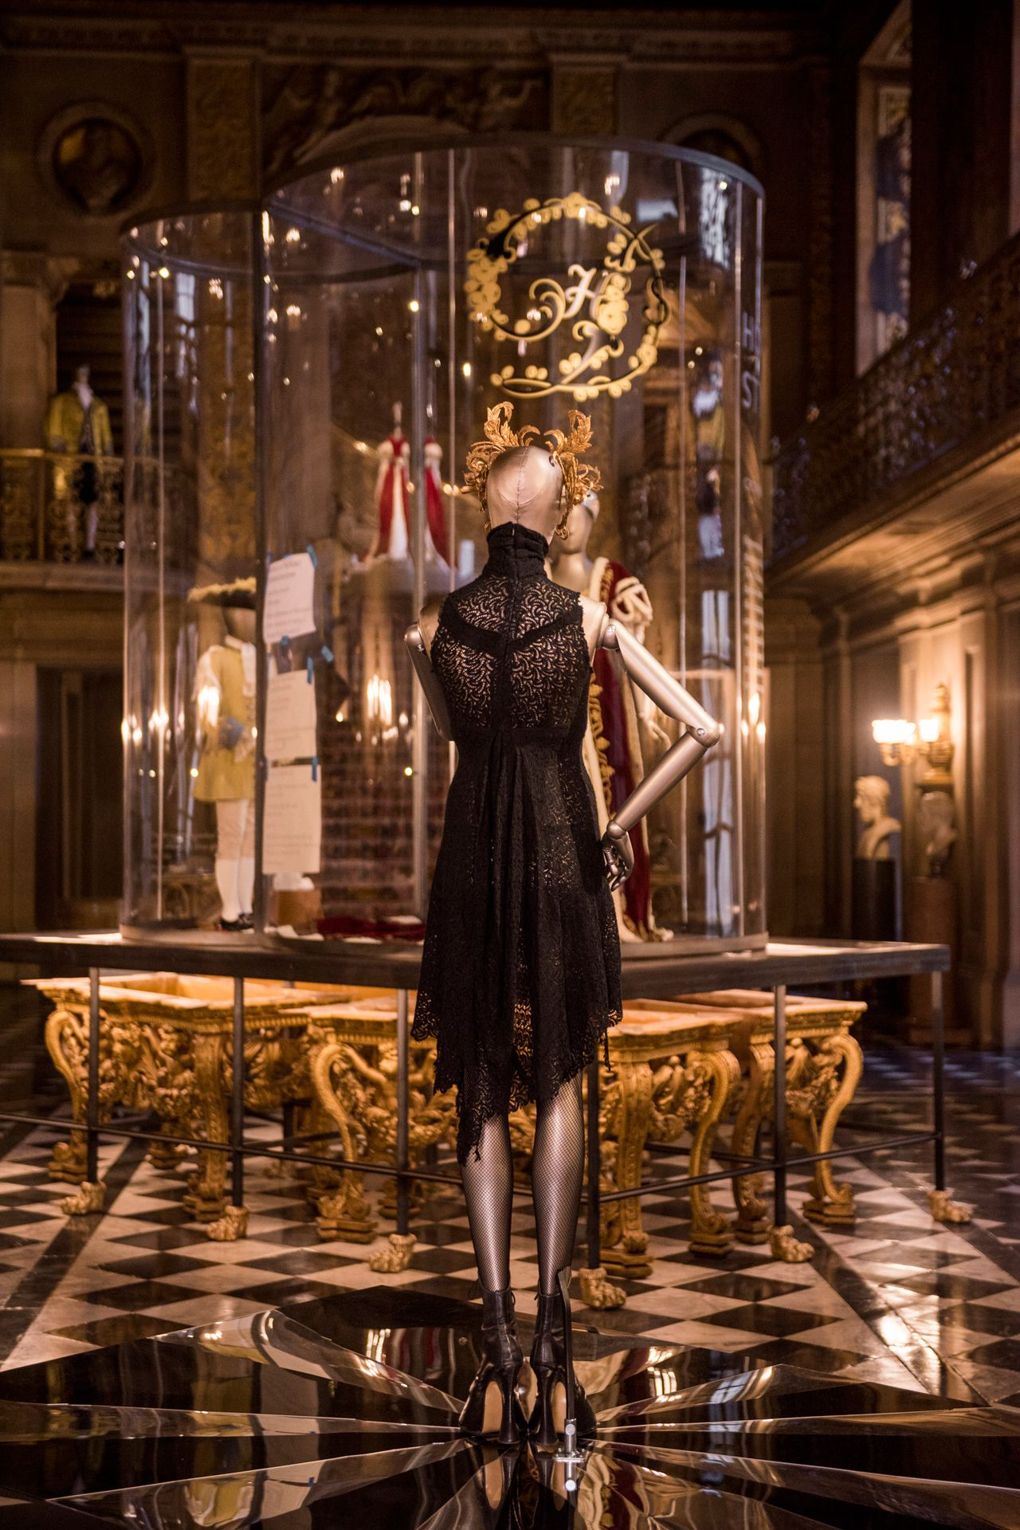  An Alexander McQueen dress worn by Stella Tennant in British Vogue is displayed in The Painted Hall at Chatsworth House. Image courtesy of Chatsworth Trust. 